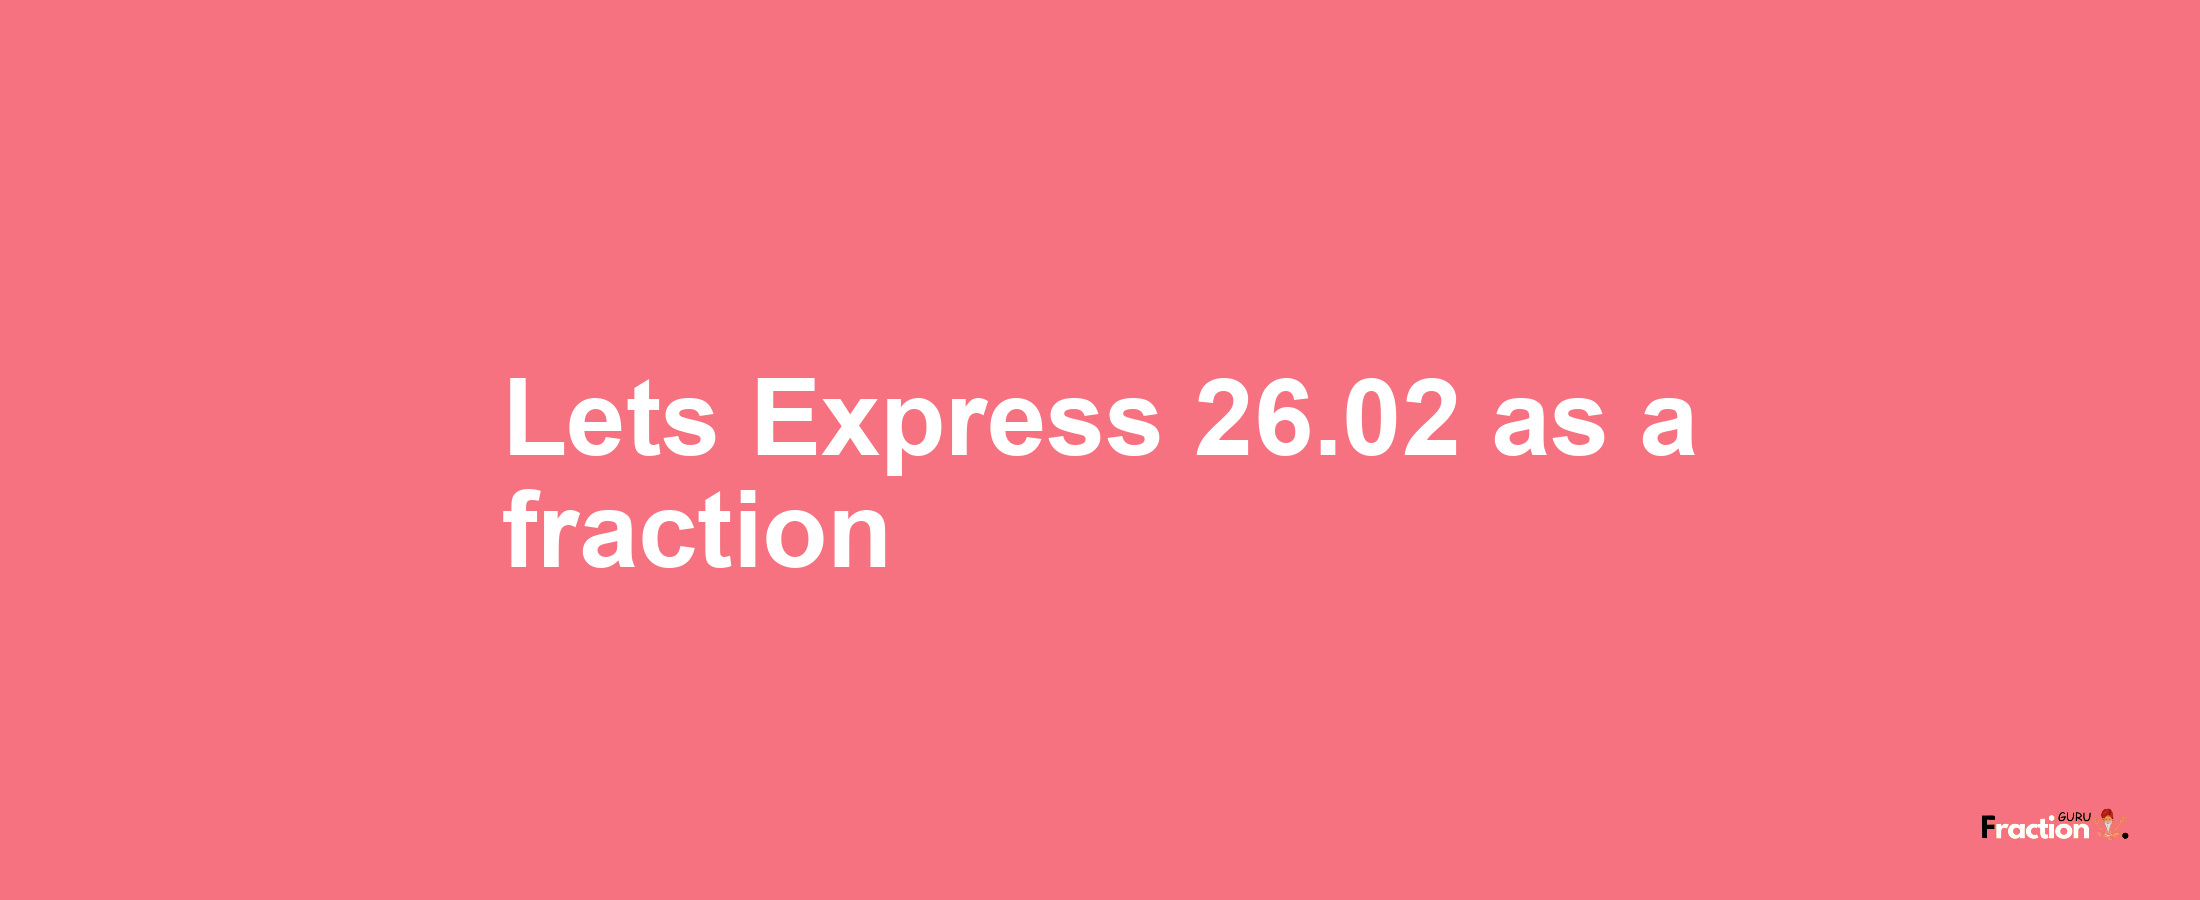 Lets Express 26.02 as afraction